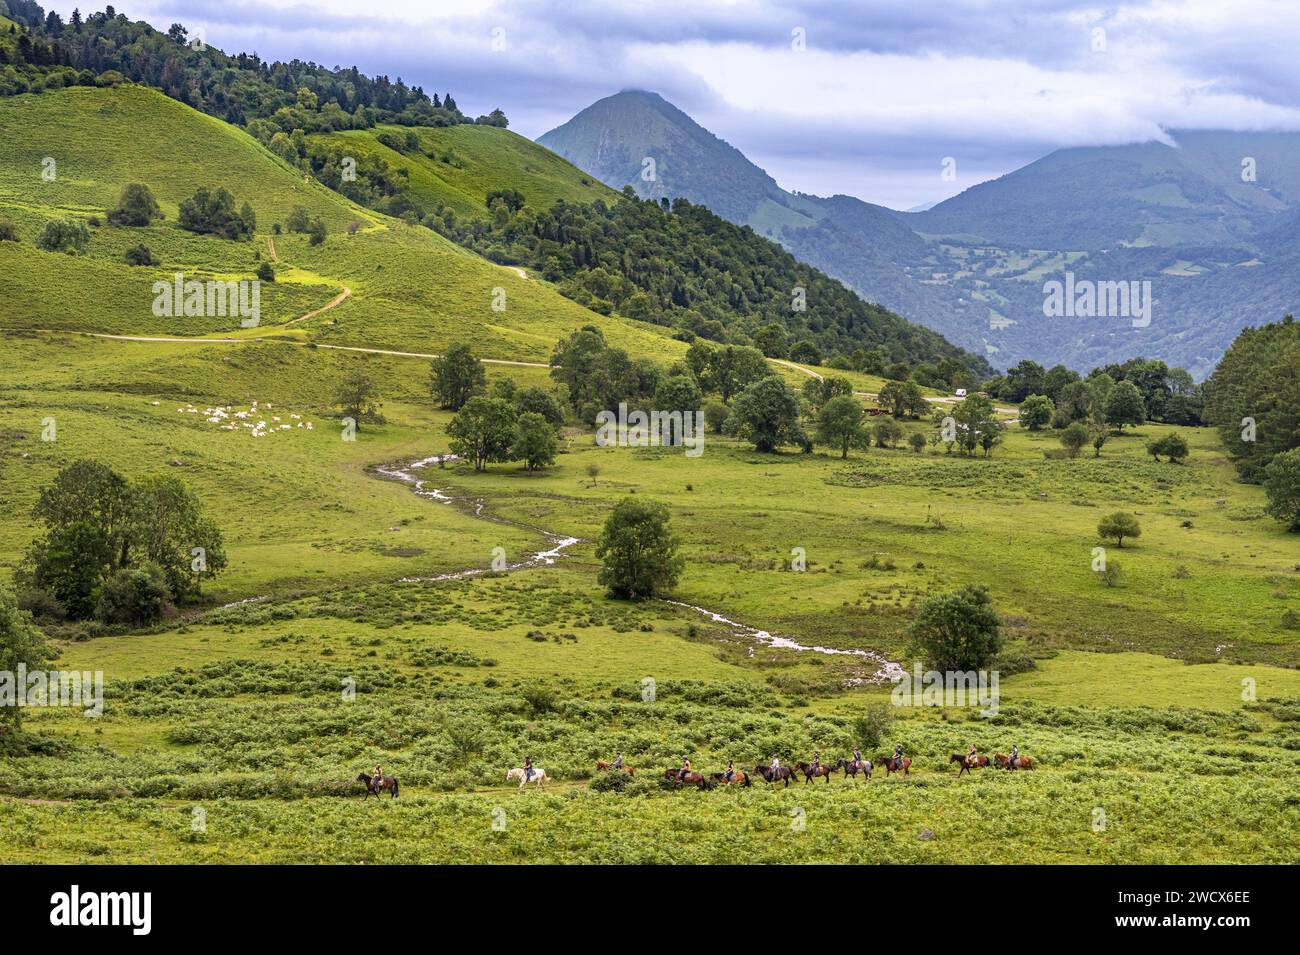 France, Pyrenees Atlantiques, Béarn, Ossau valley, horse riding on the Benou plateau, Bilhères Stock Photo